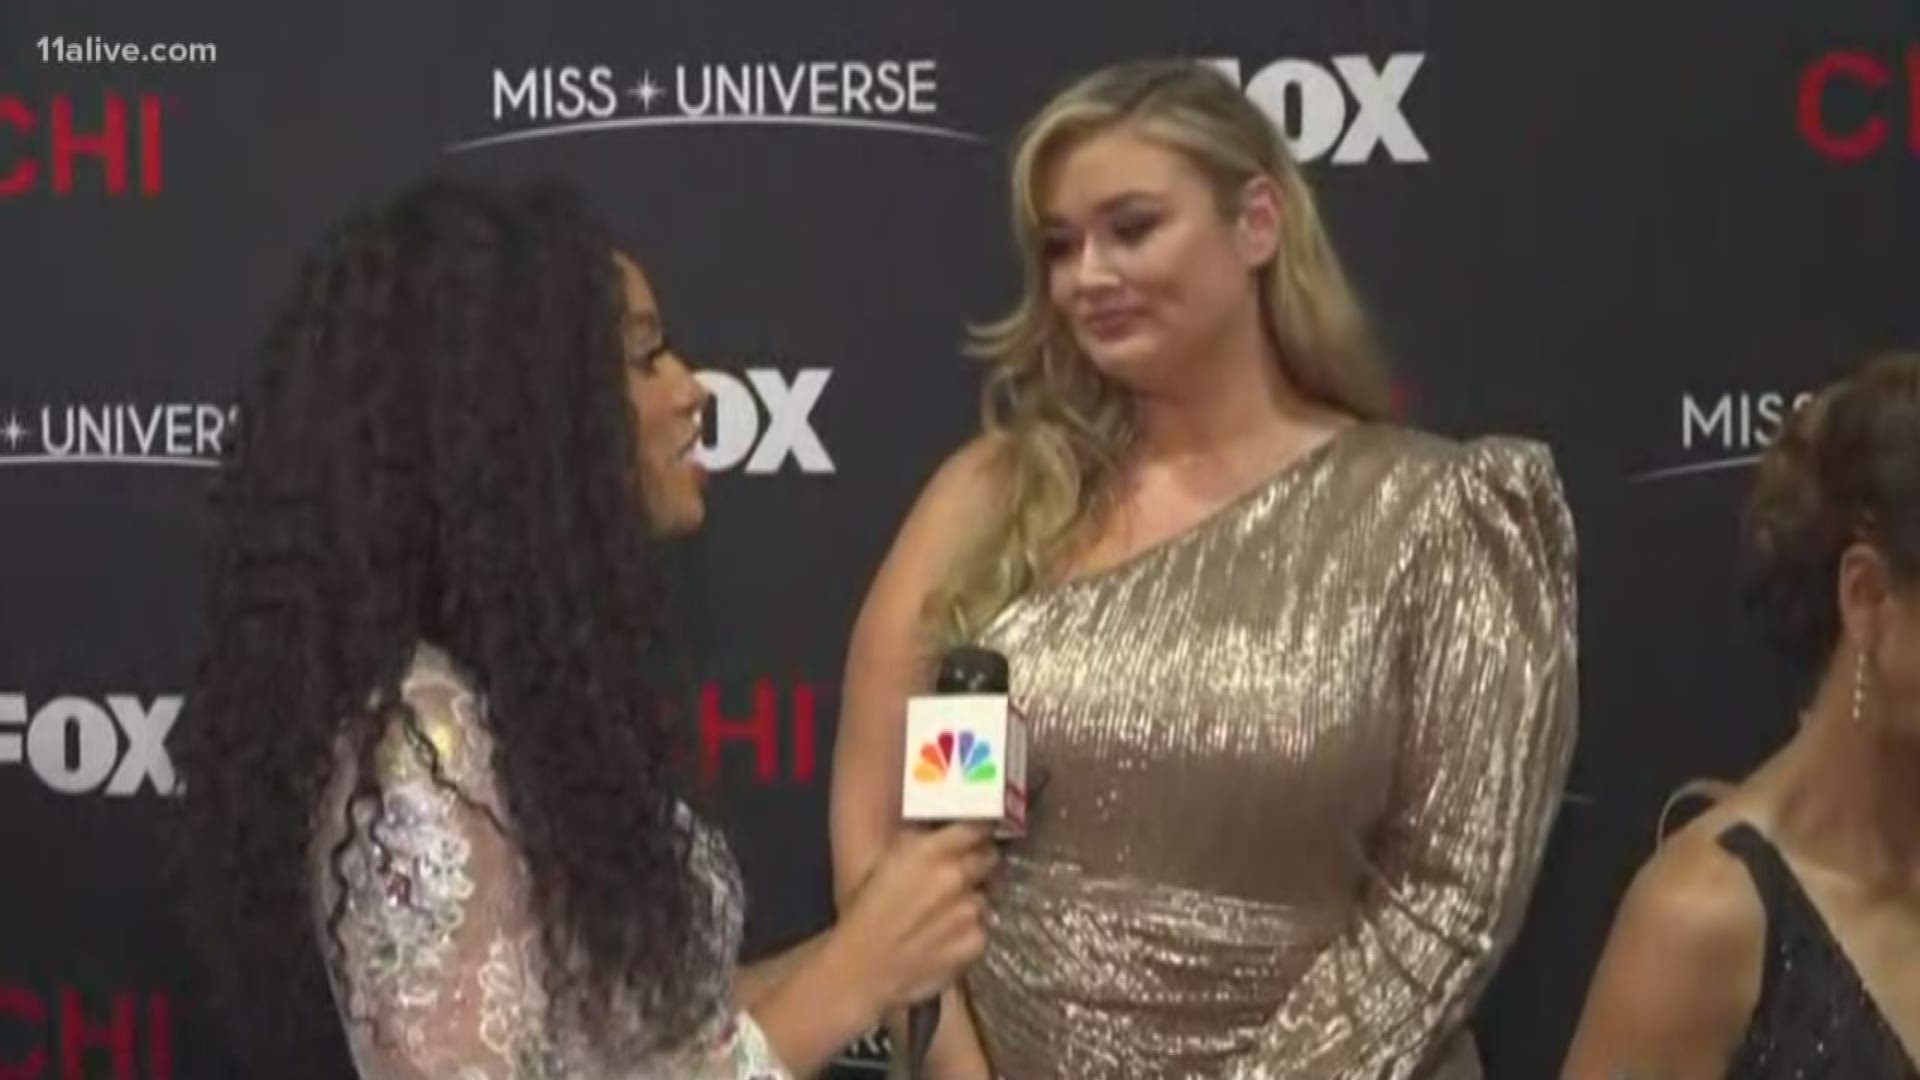 McGrady, a plus-size model, said she's inspired by the inclusivity and diversity of the competition.